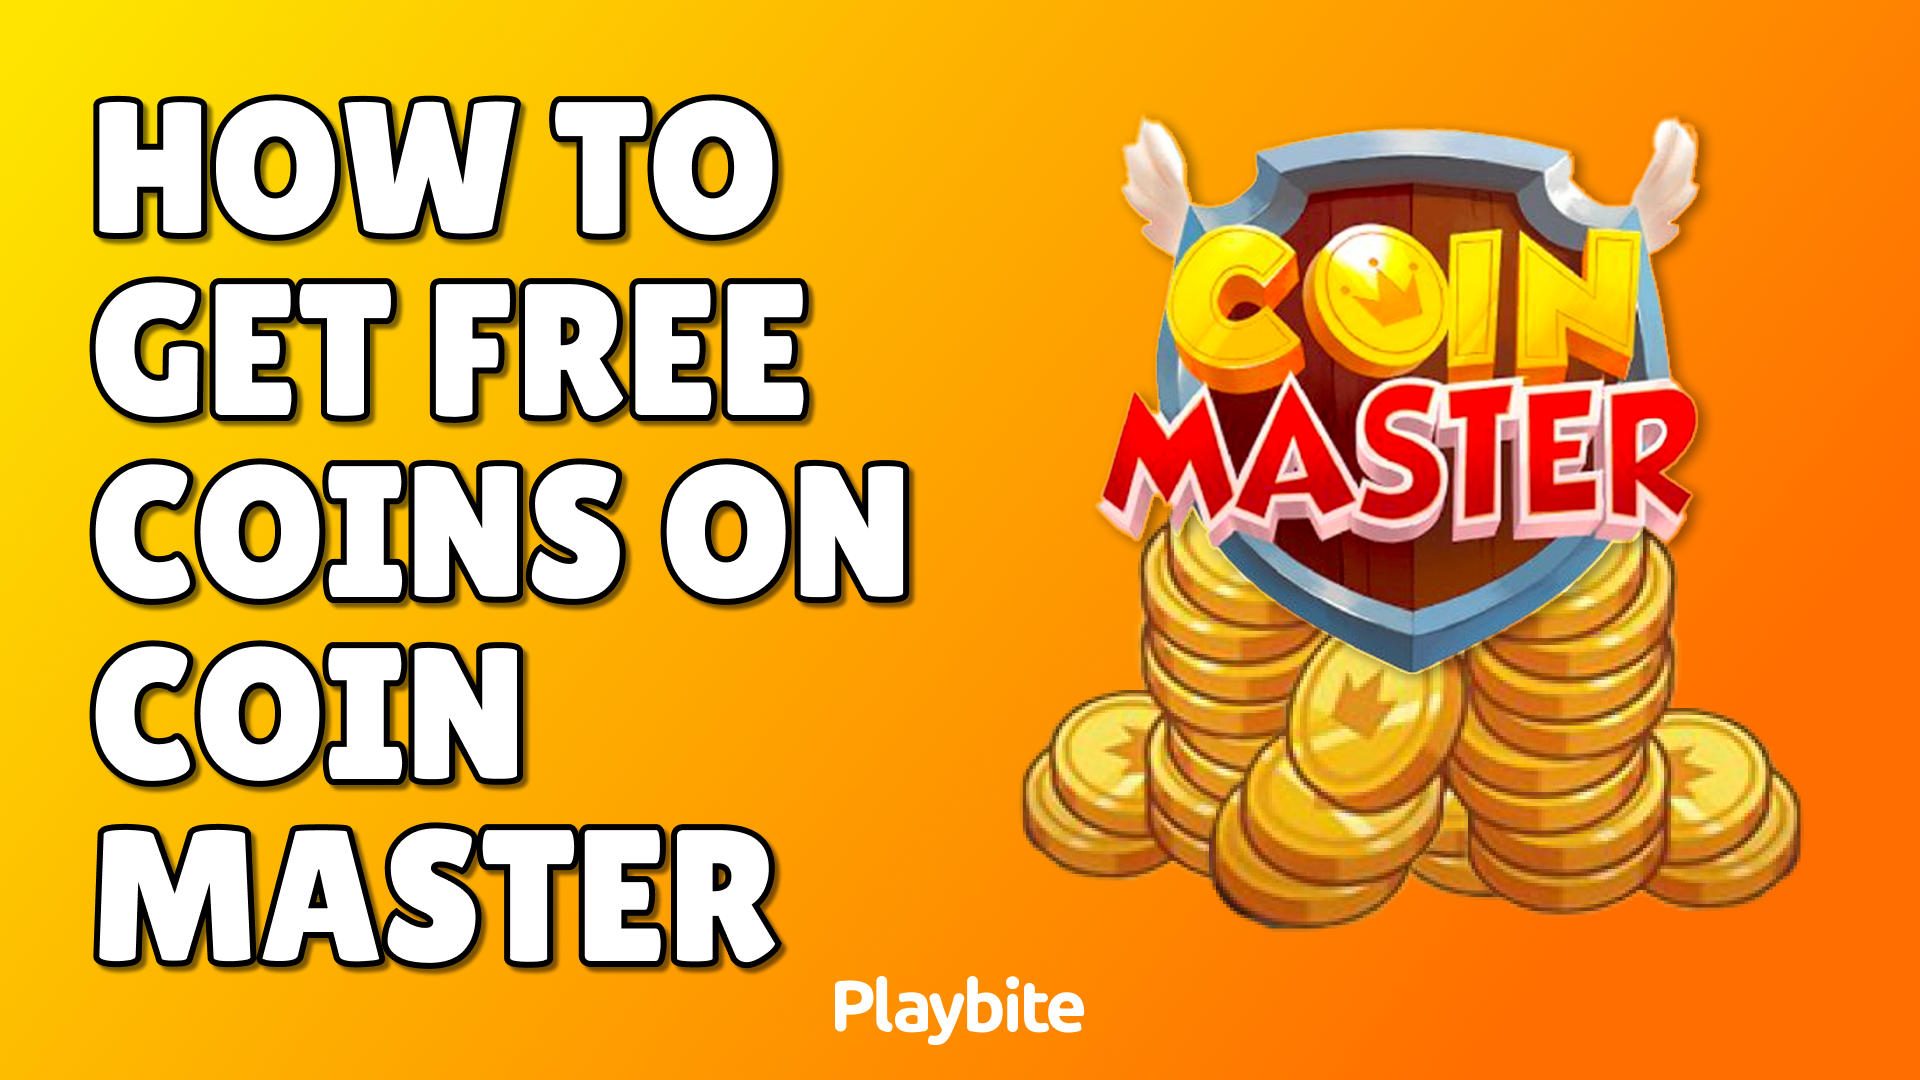 How To Get Free Coins On Coin Master